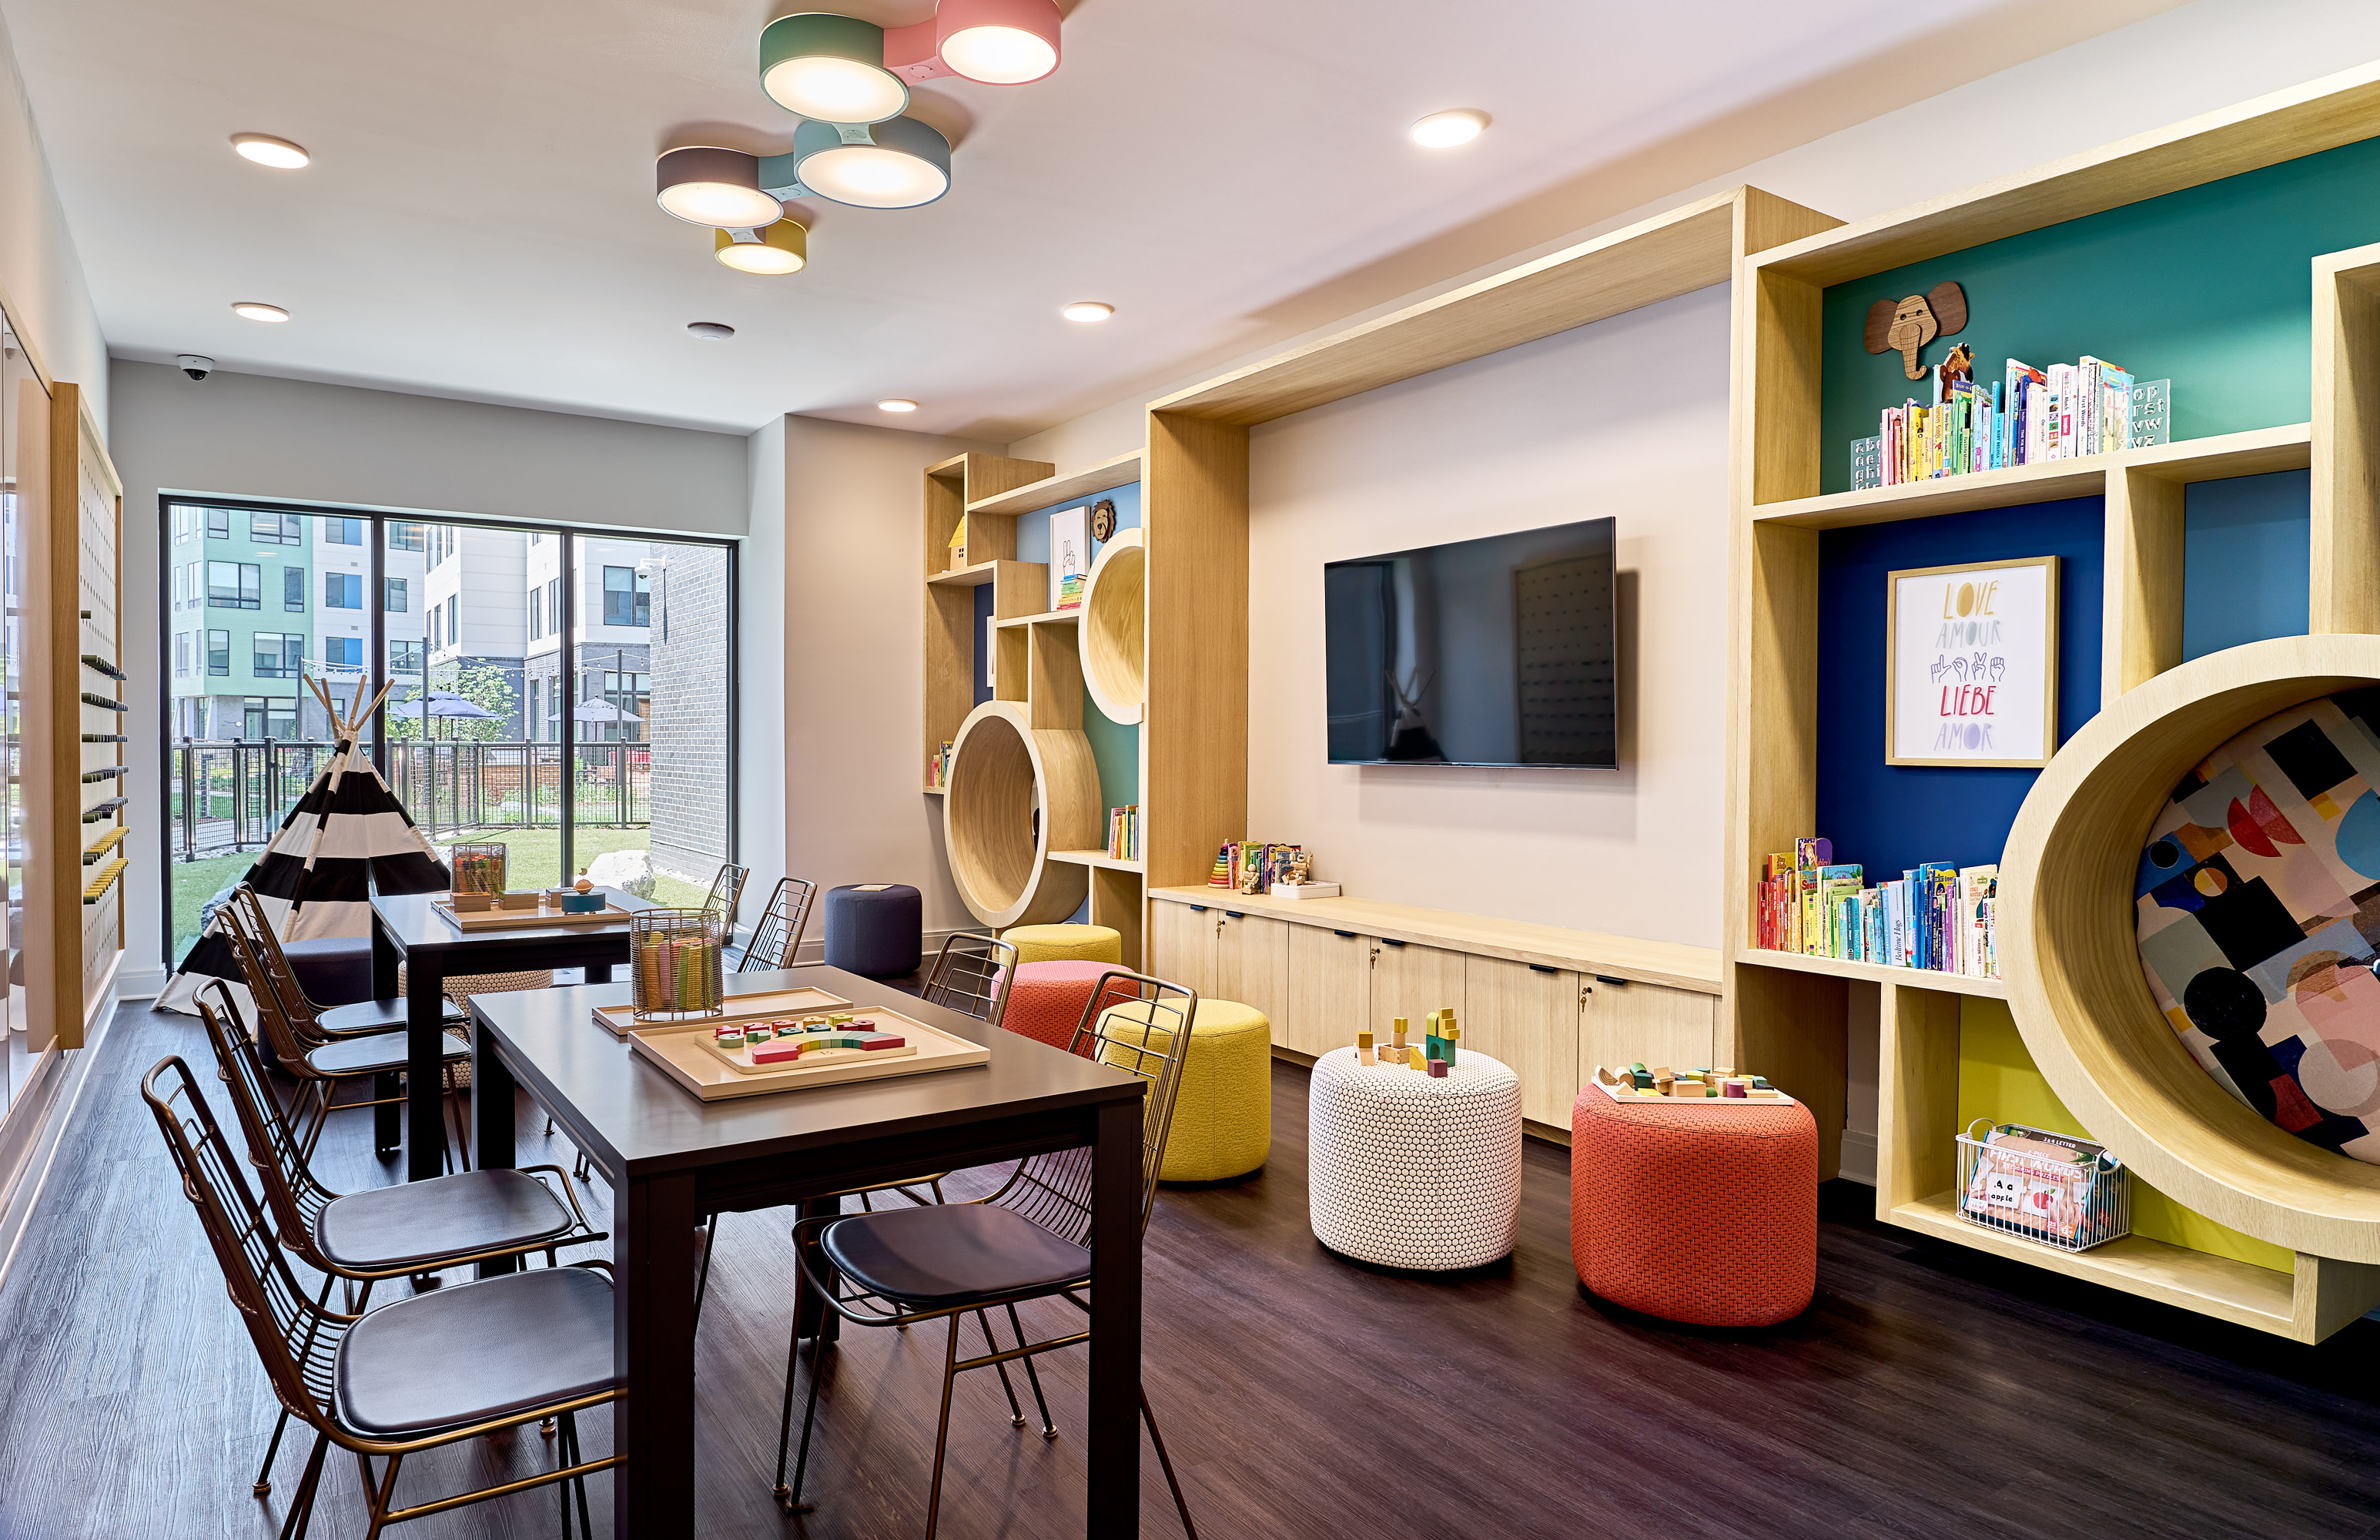 A mix of high contrast, bright colors inspire play and imagination in this children’s room.